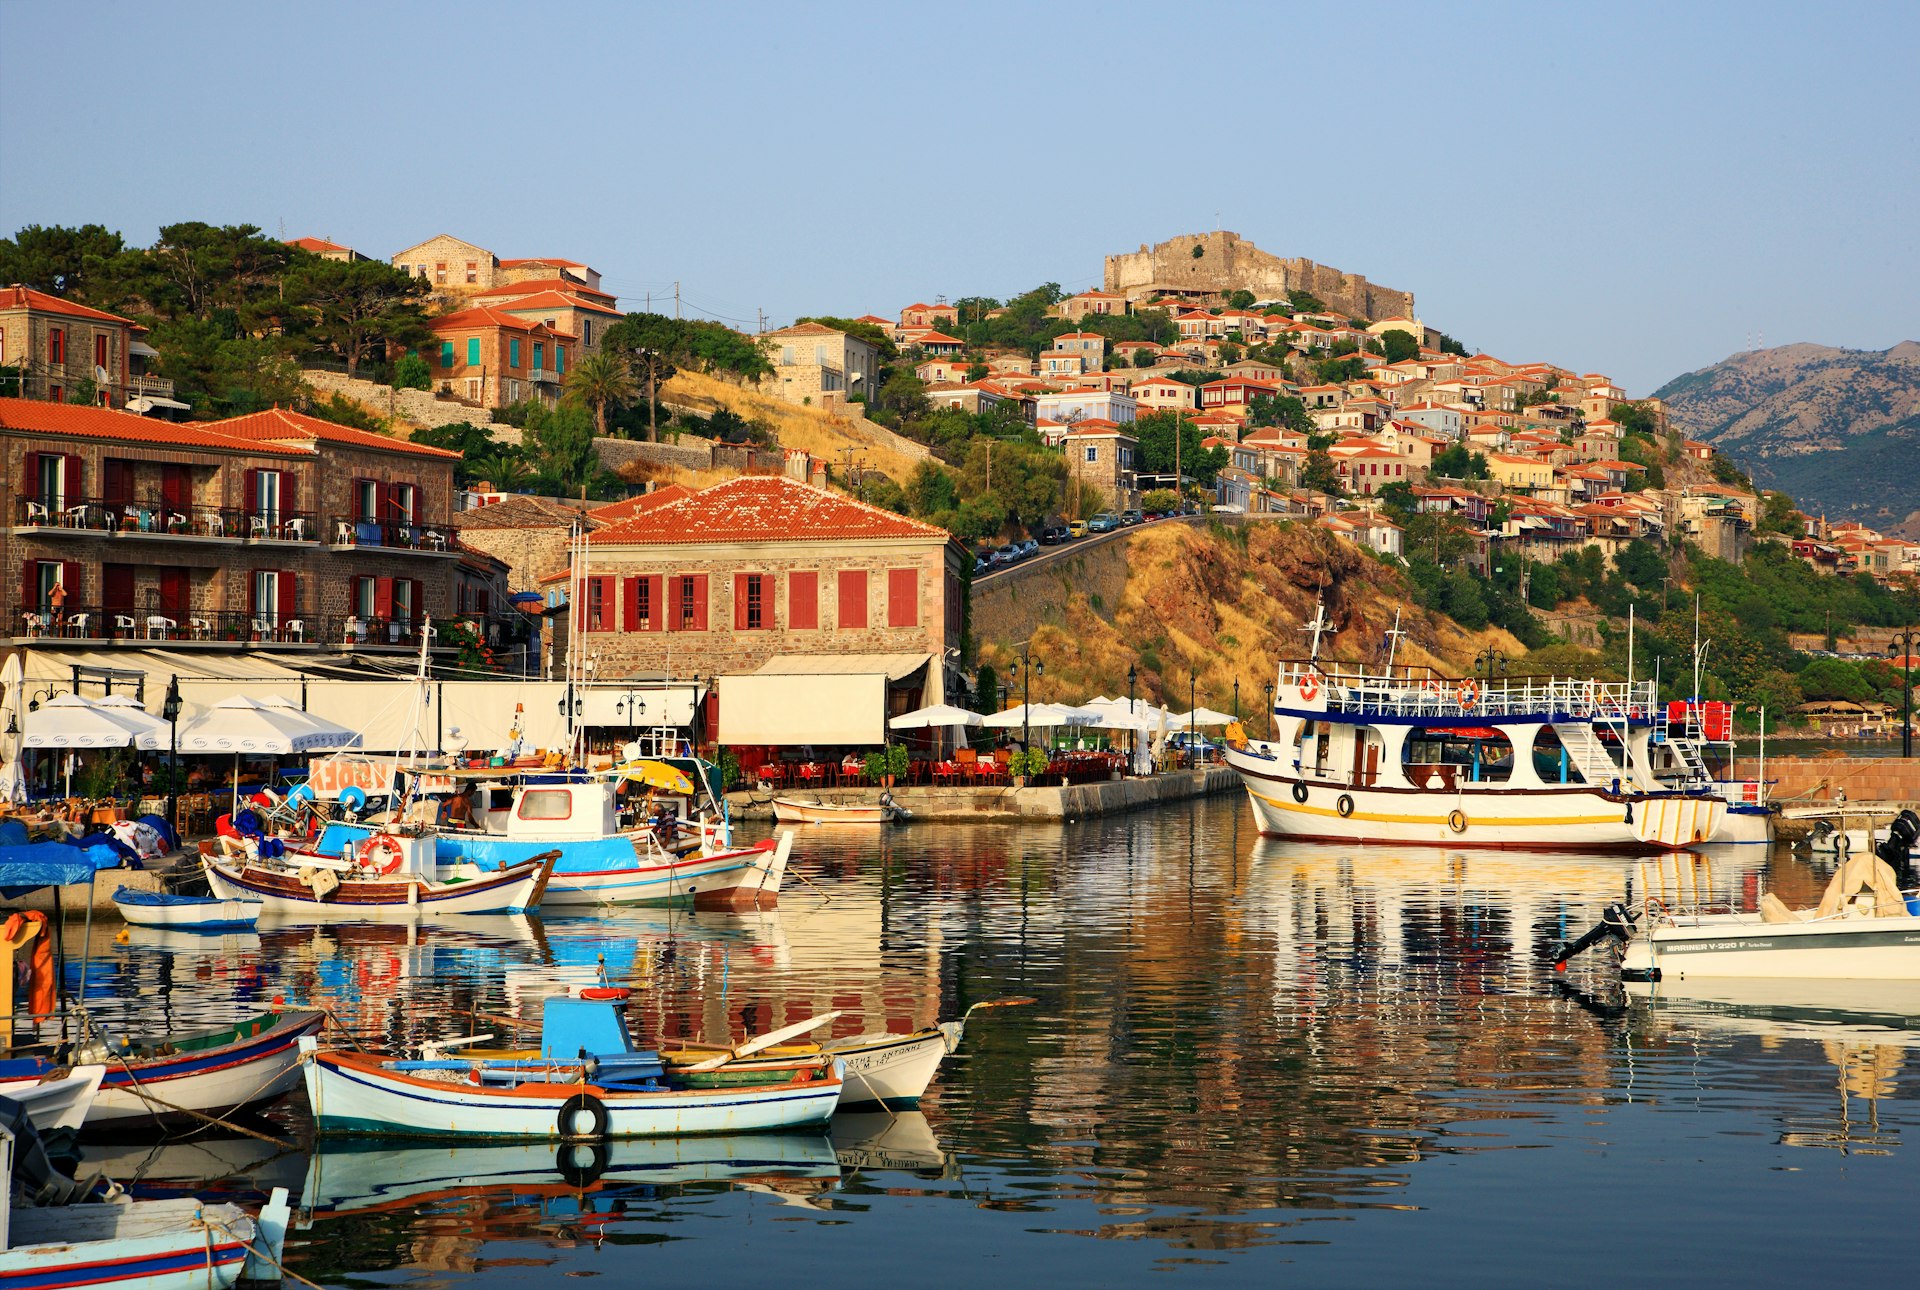 The harbour of Molyvos town and its castle on top of the hill. A number of fishing boats are moored in the harbour.